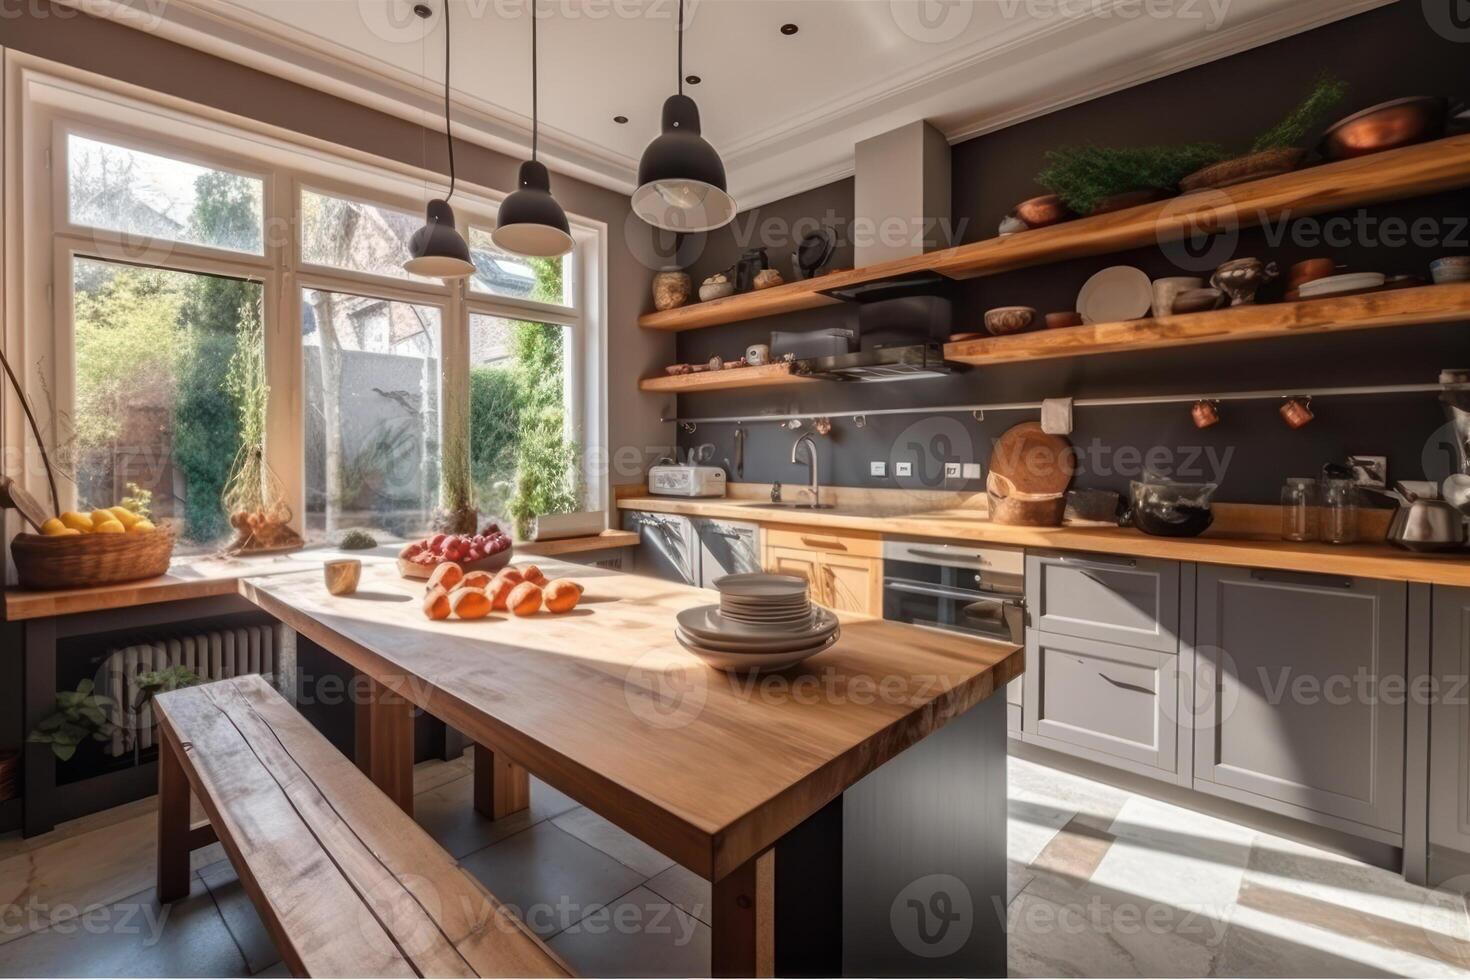 stock photo of a natural kitchen near in the garden modern style breakfast photography